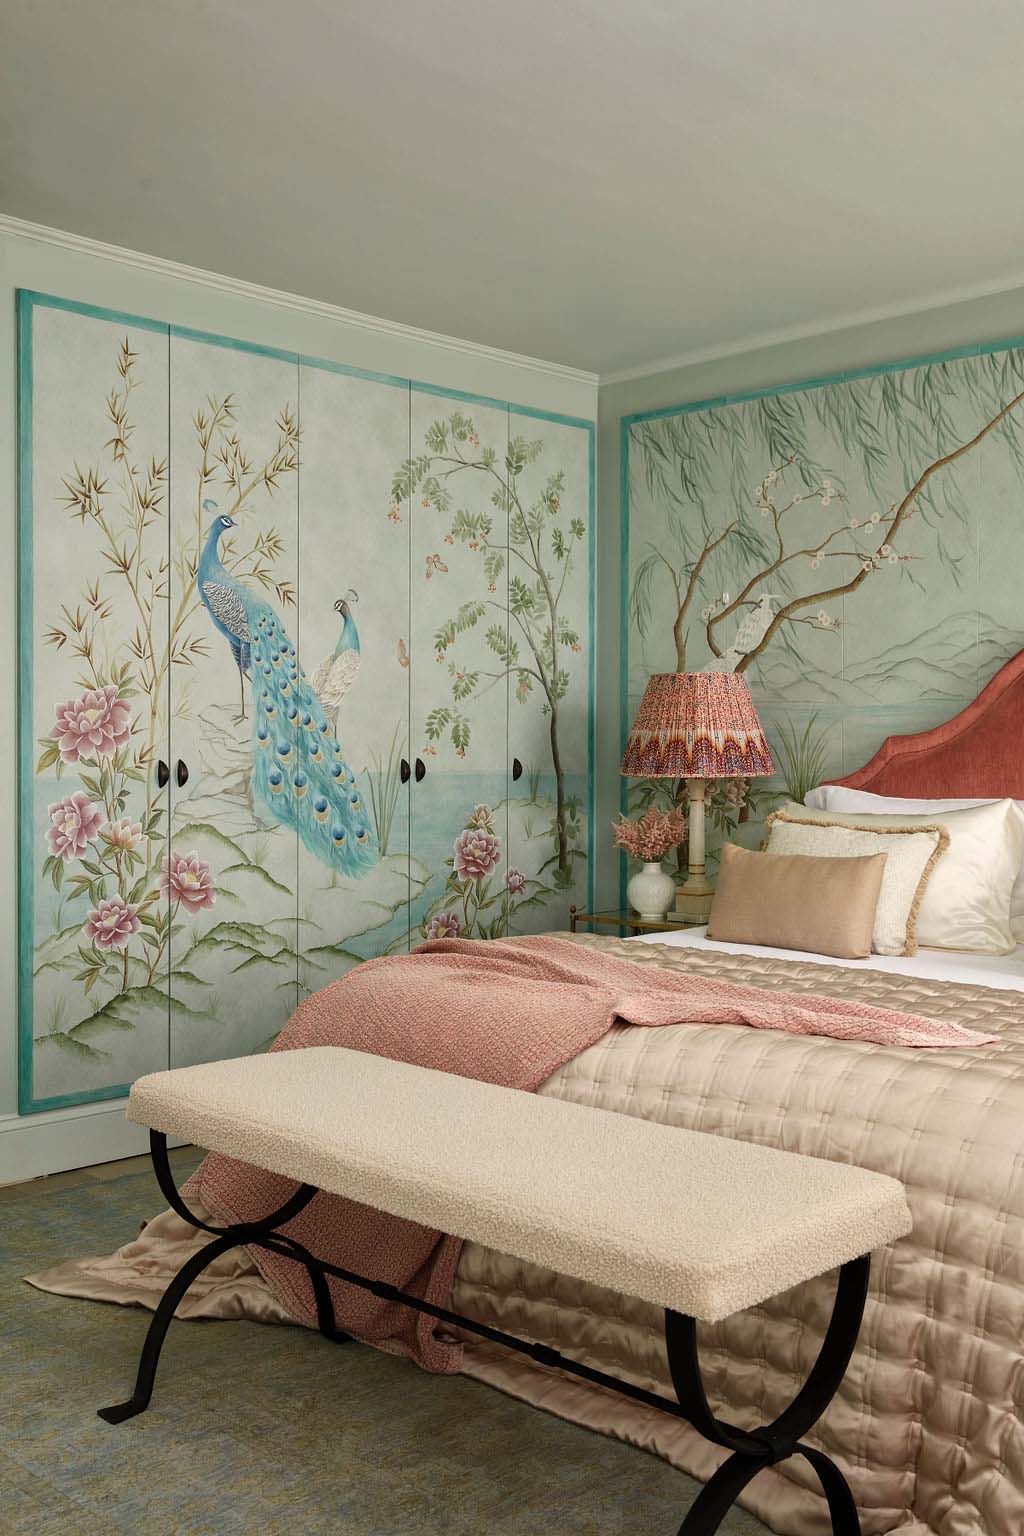 Chinoiserie wardrobe and wall murals painted by hand by Diane Hill in a Knightsbridge townhouse bedroom